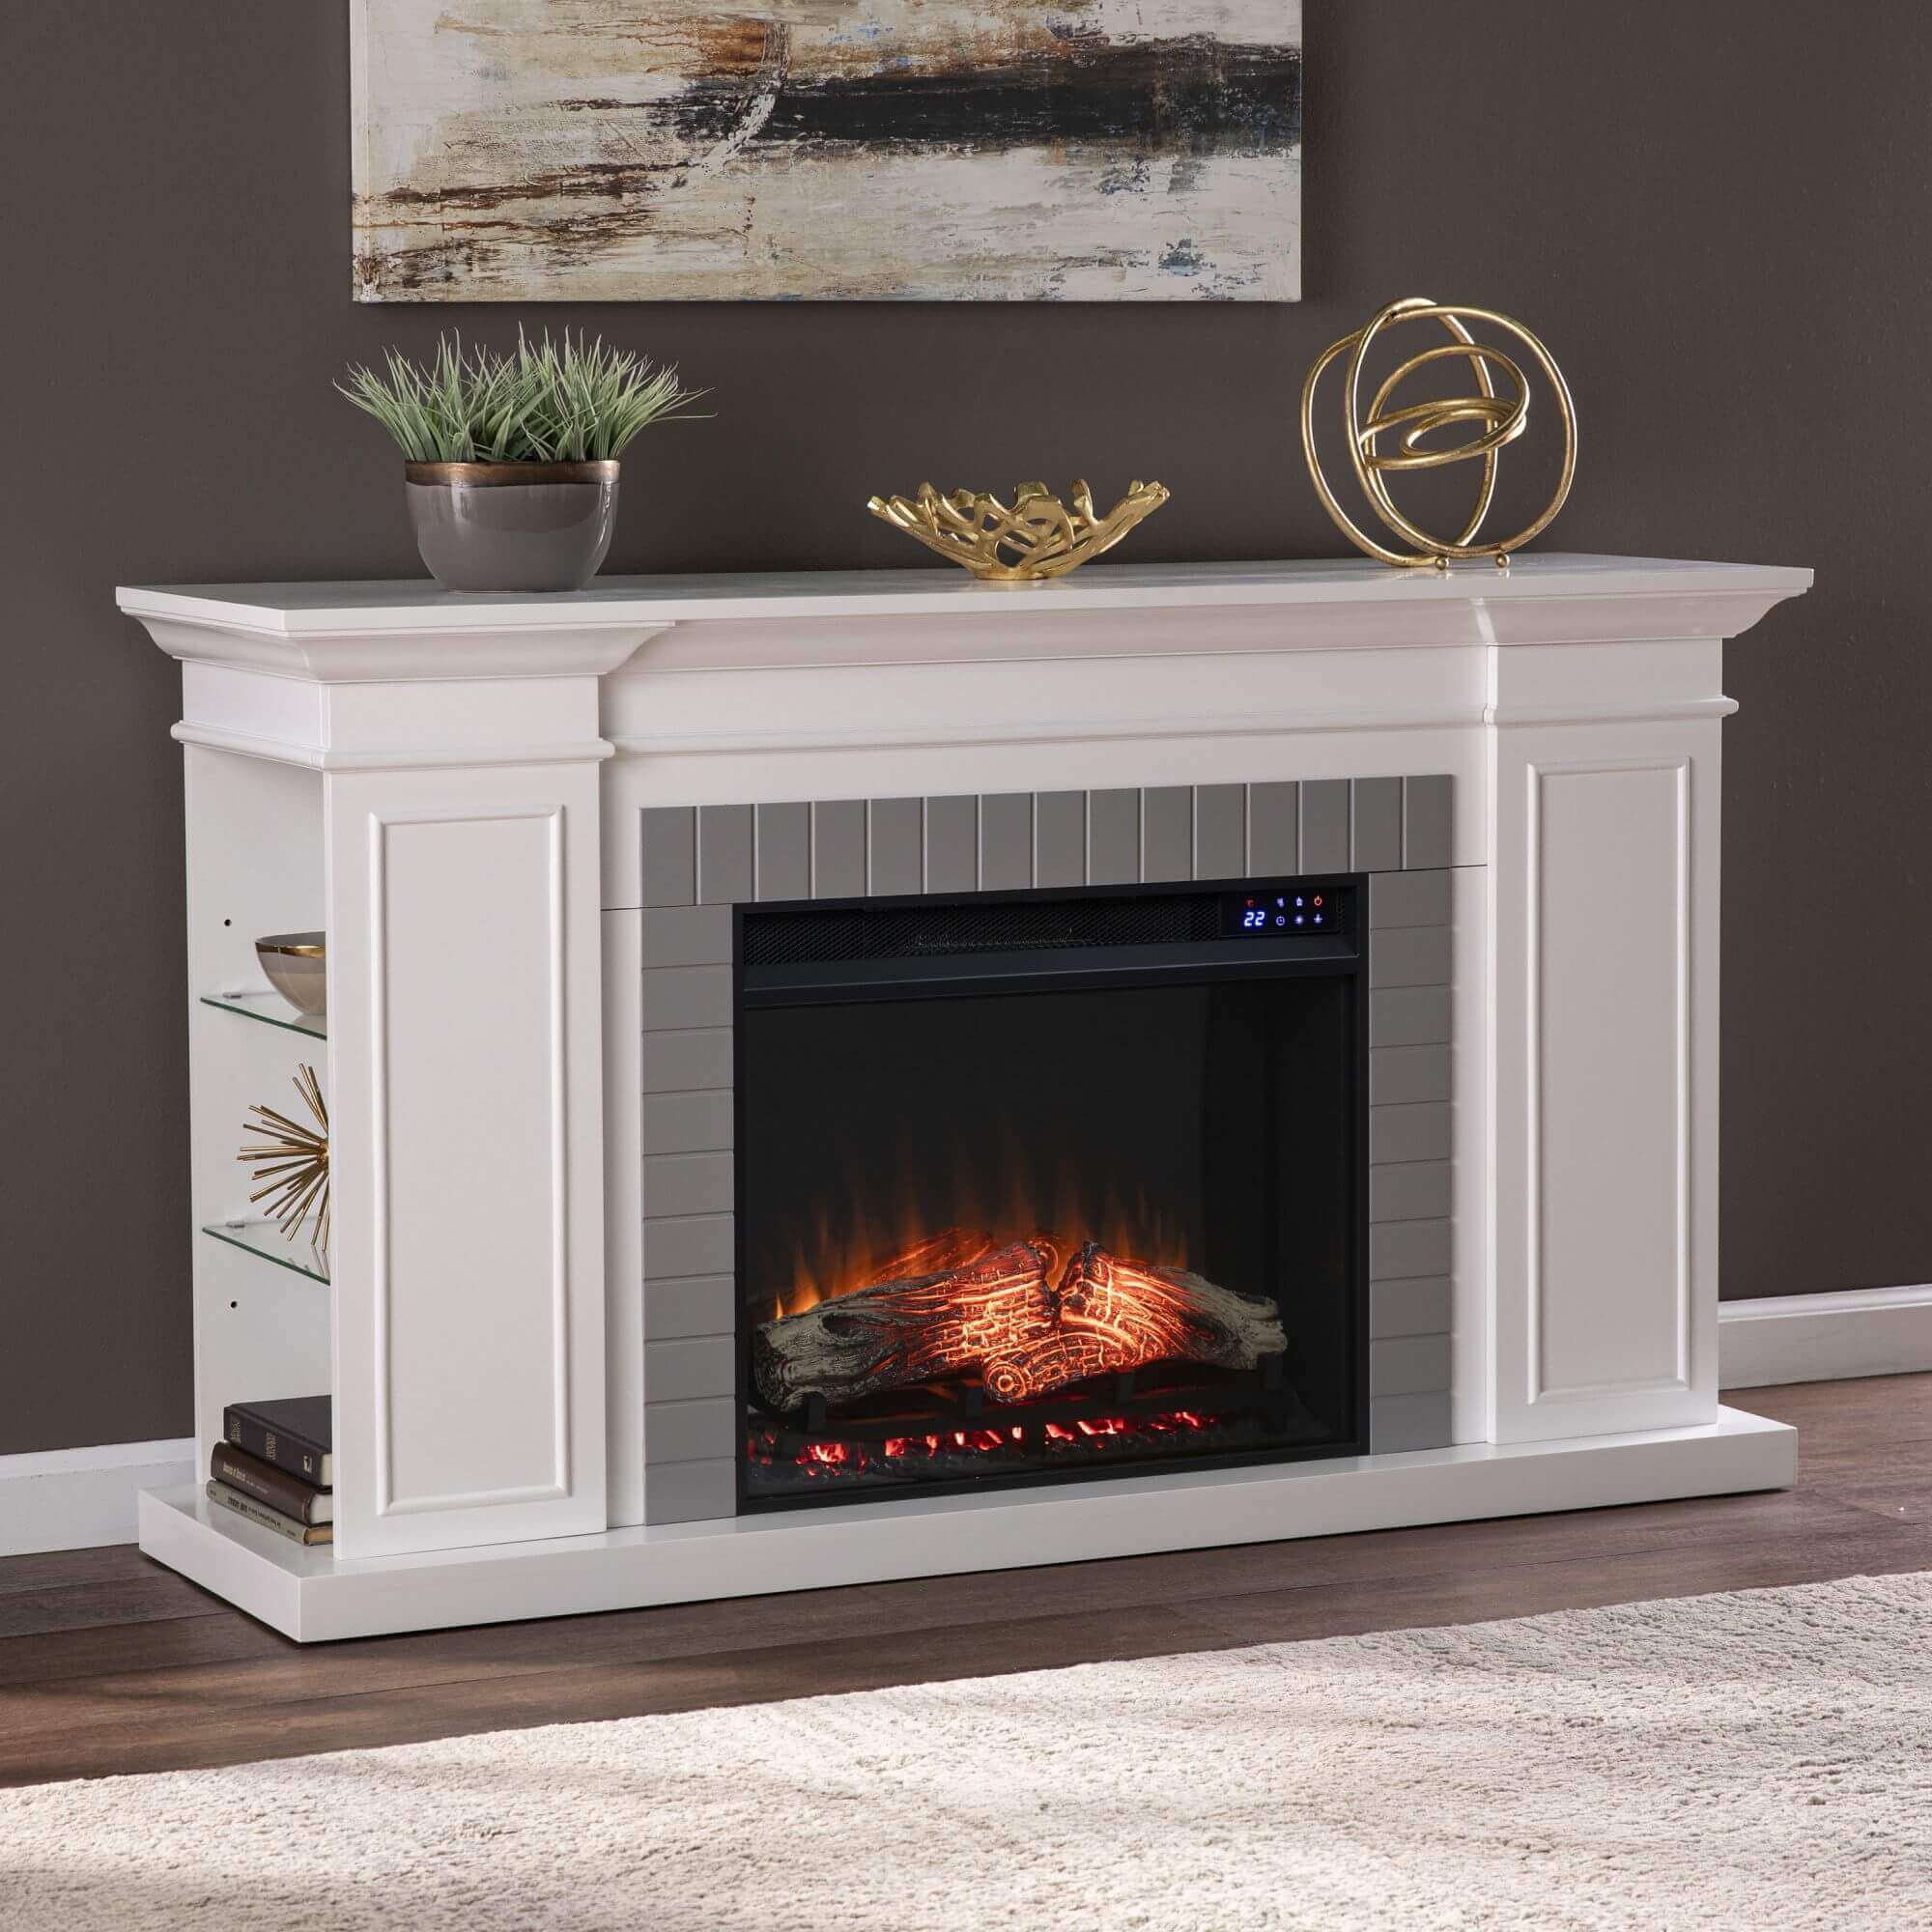 Rylana Bookcase Electric Fireplace with Touch Screen Control Panel